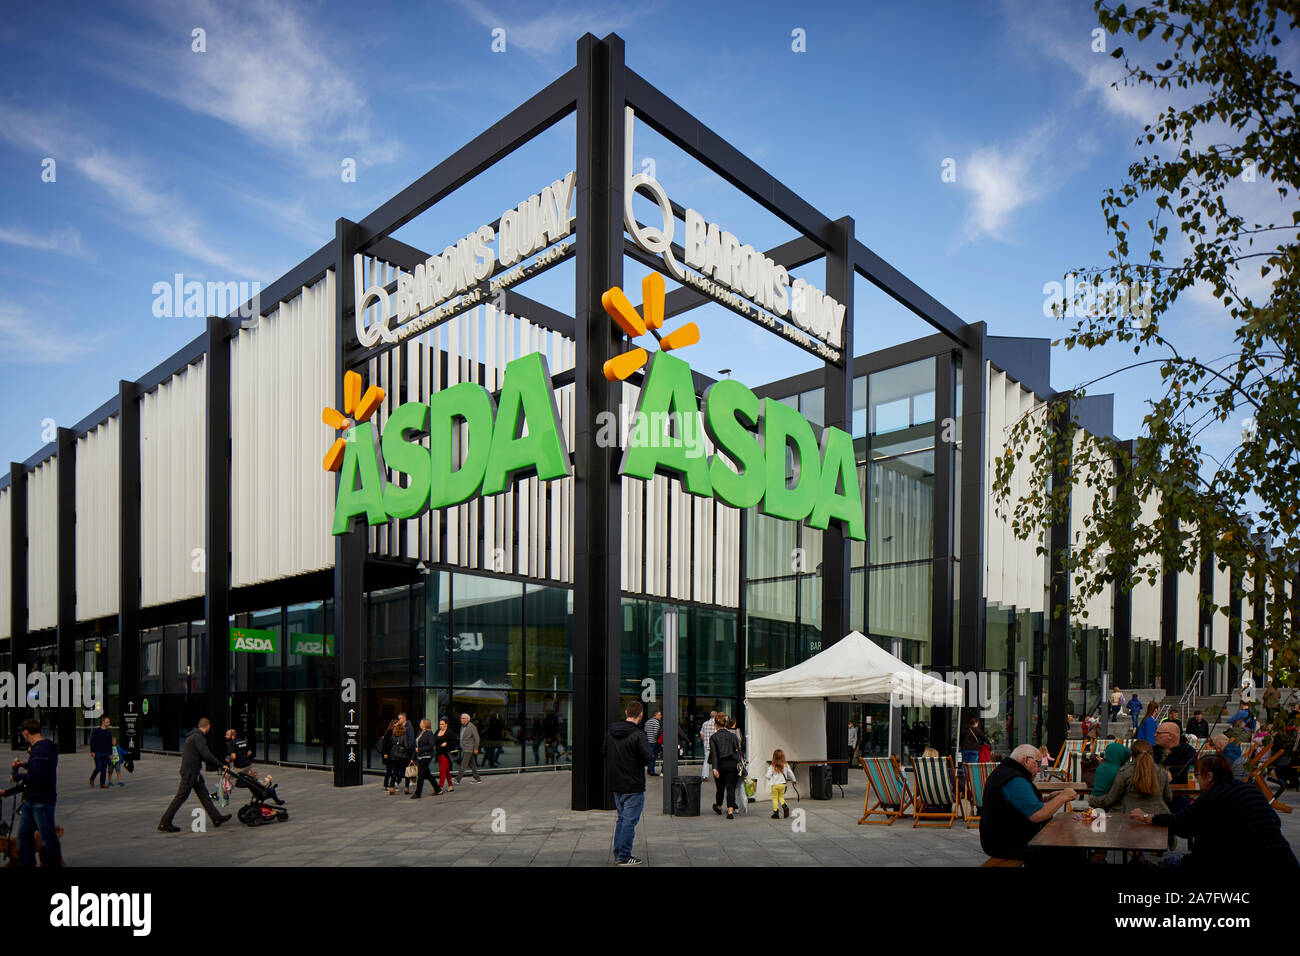 Northwich Chesire market town Quay Barons moderne centre commercial avec grand ASDA superstore Banque D'Images